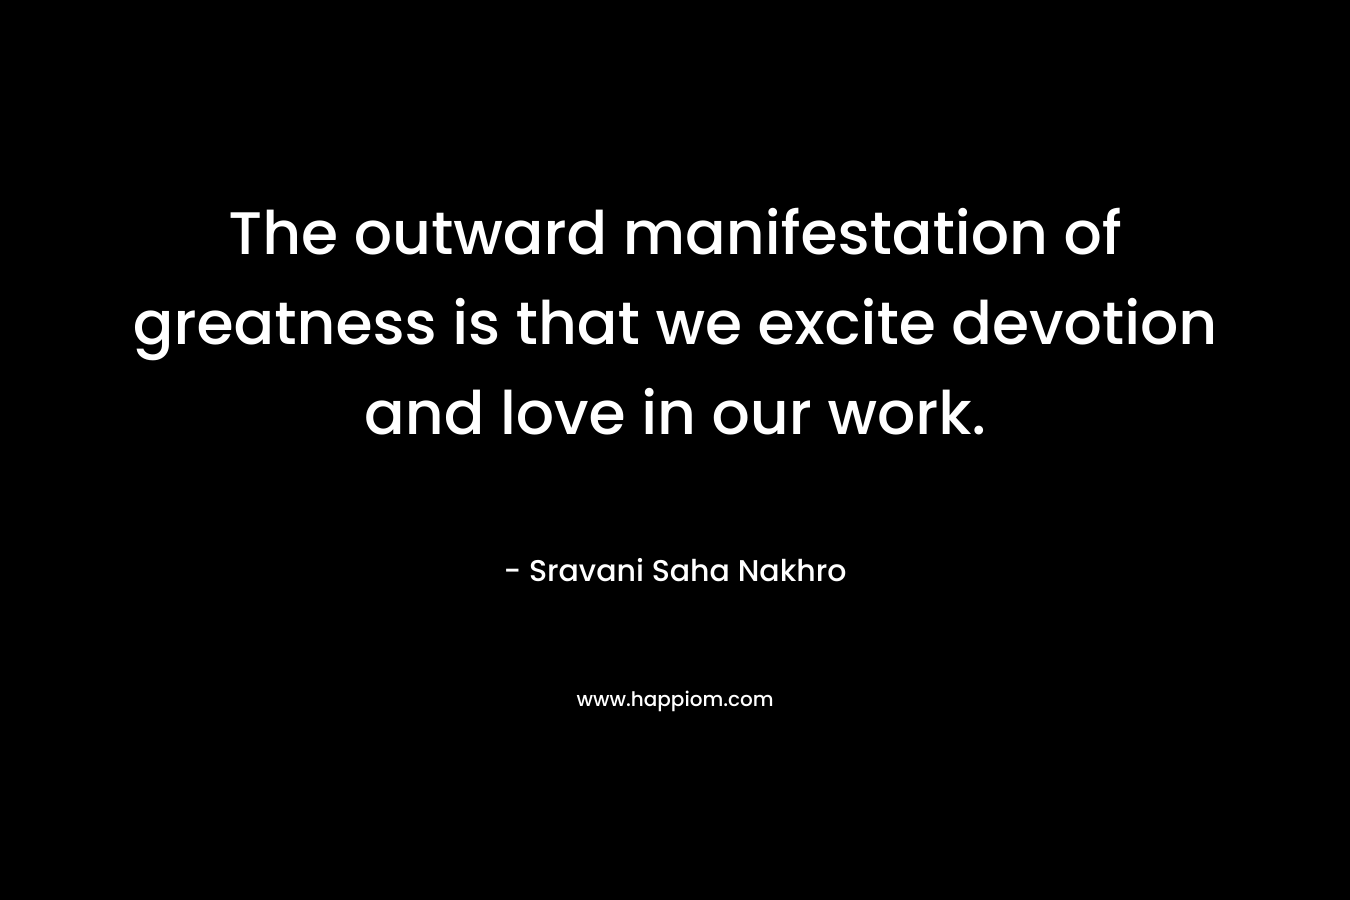 The outward manifestation of greatness is that we excite devotion and love in our work. – Sravani Saha Nakhro